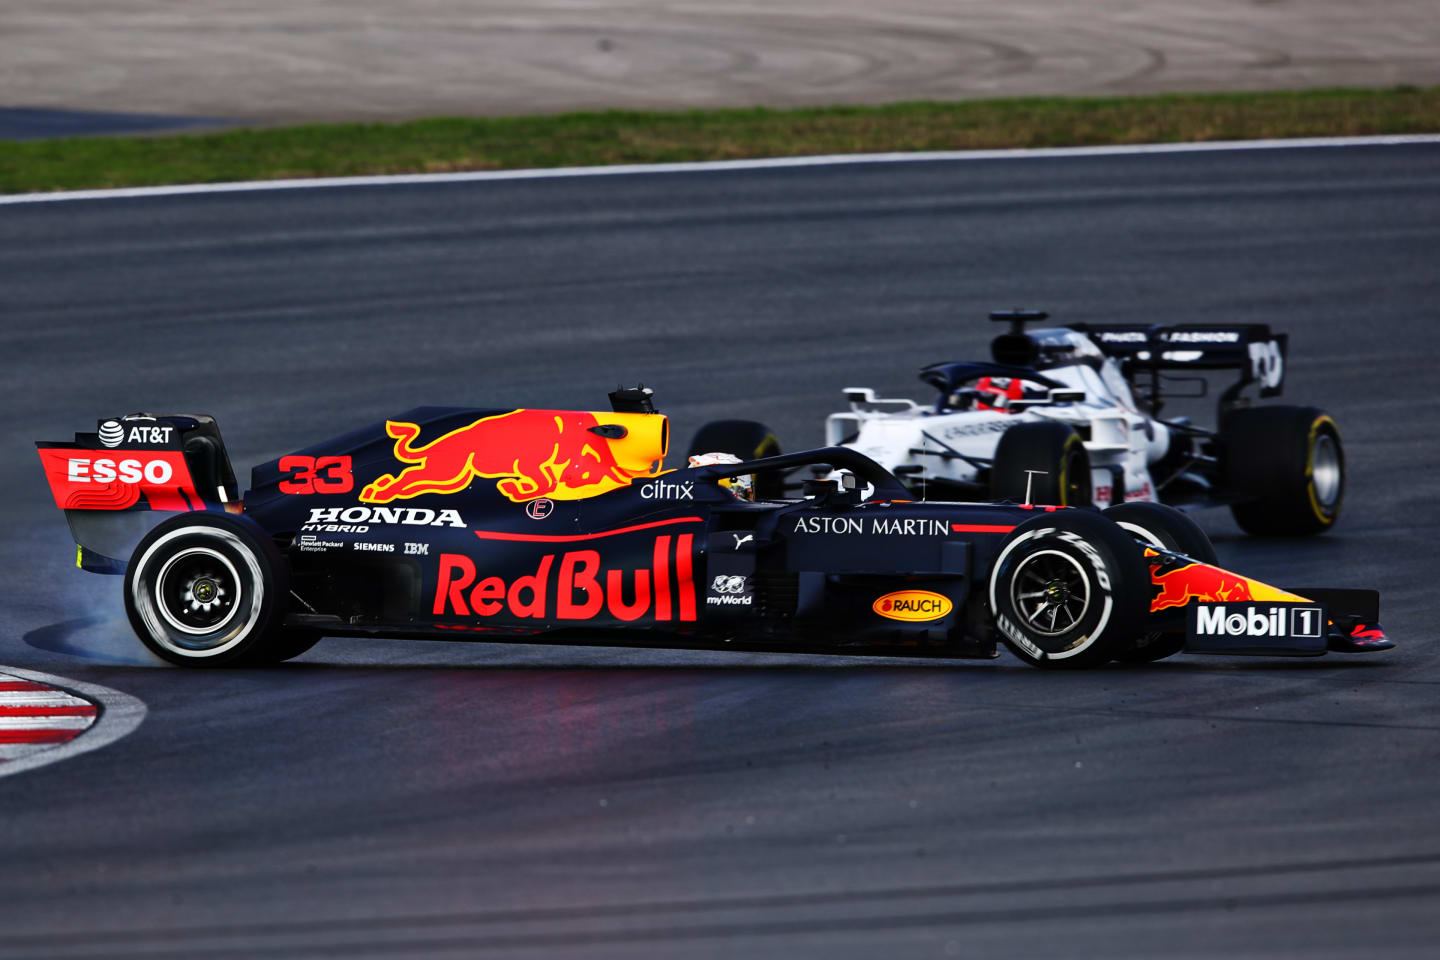 ISTANBUL, TURKEY - NOVEMBER 13: Max Verstappen of the Netherlands driving the (33) Aston Martin Red Bull Racing RB16 spins in front of Daniil Kvyat of Russia driving the (26) Scuderia AlphaTauri AT01 Honda during practice ahead of the F1 Grand Prix of Turkey at Intercity Istanbul Park on November 13, 2020 in Istanbul, Turkey. (Photo by Joe Portlock - Formula 1/Formula 1 via Getty Images)